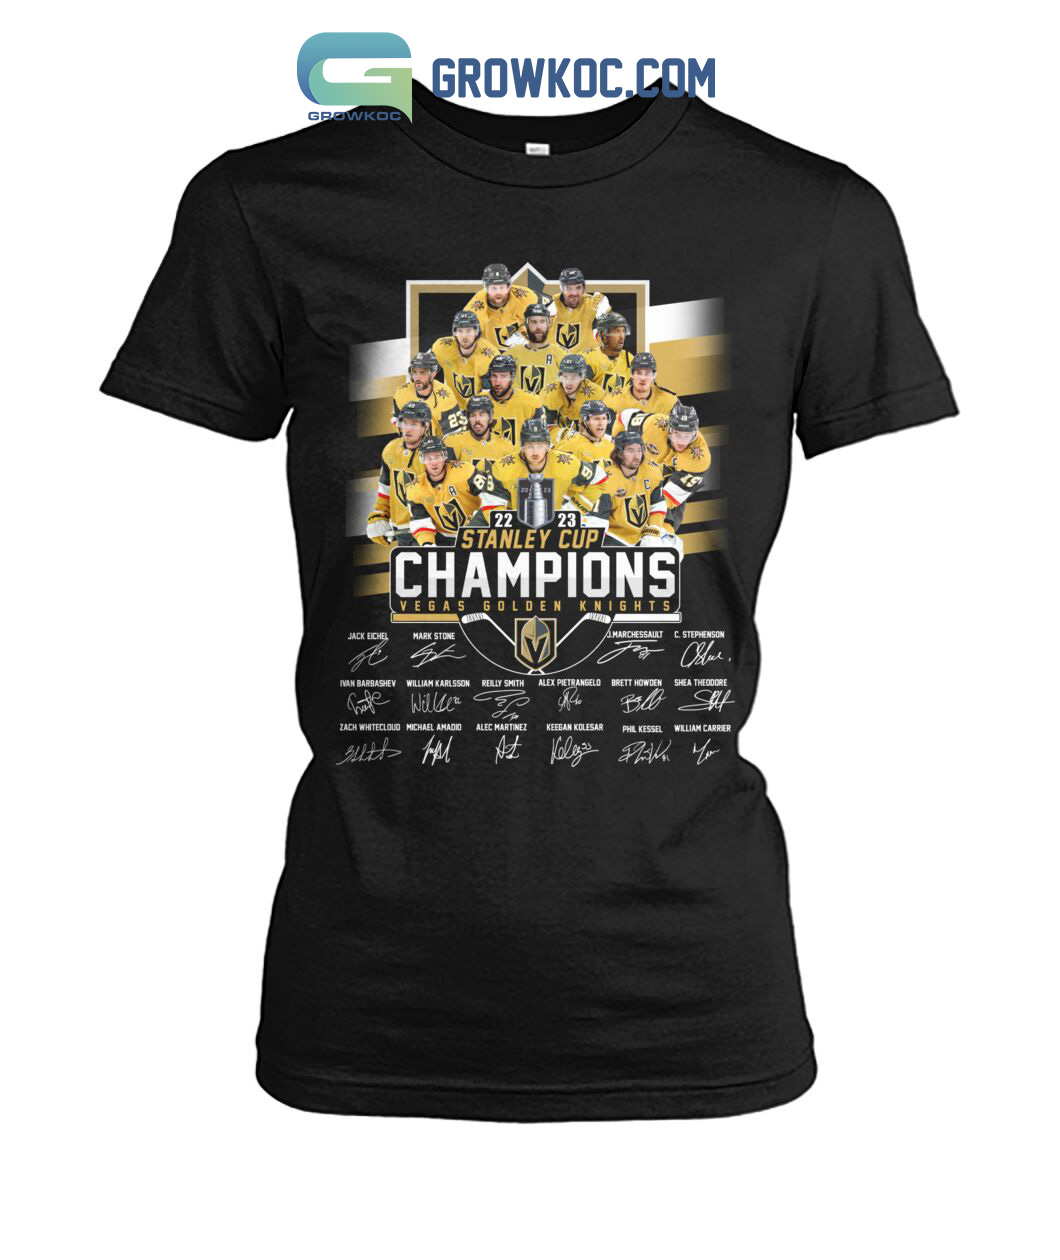 PHOTOS: 2023 Vegas Golden Knights Stanley Cup Champs merch for